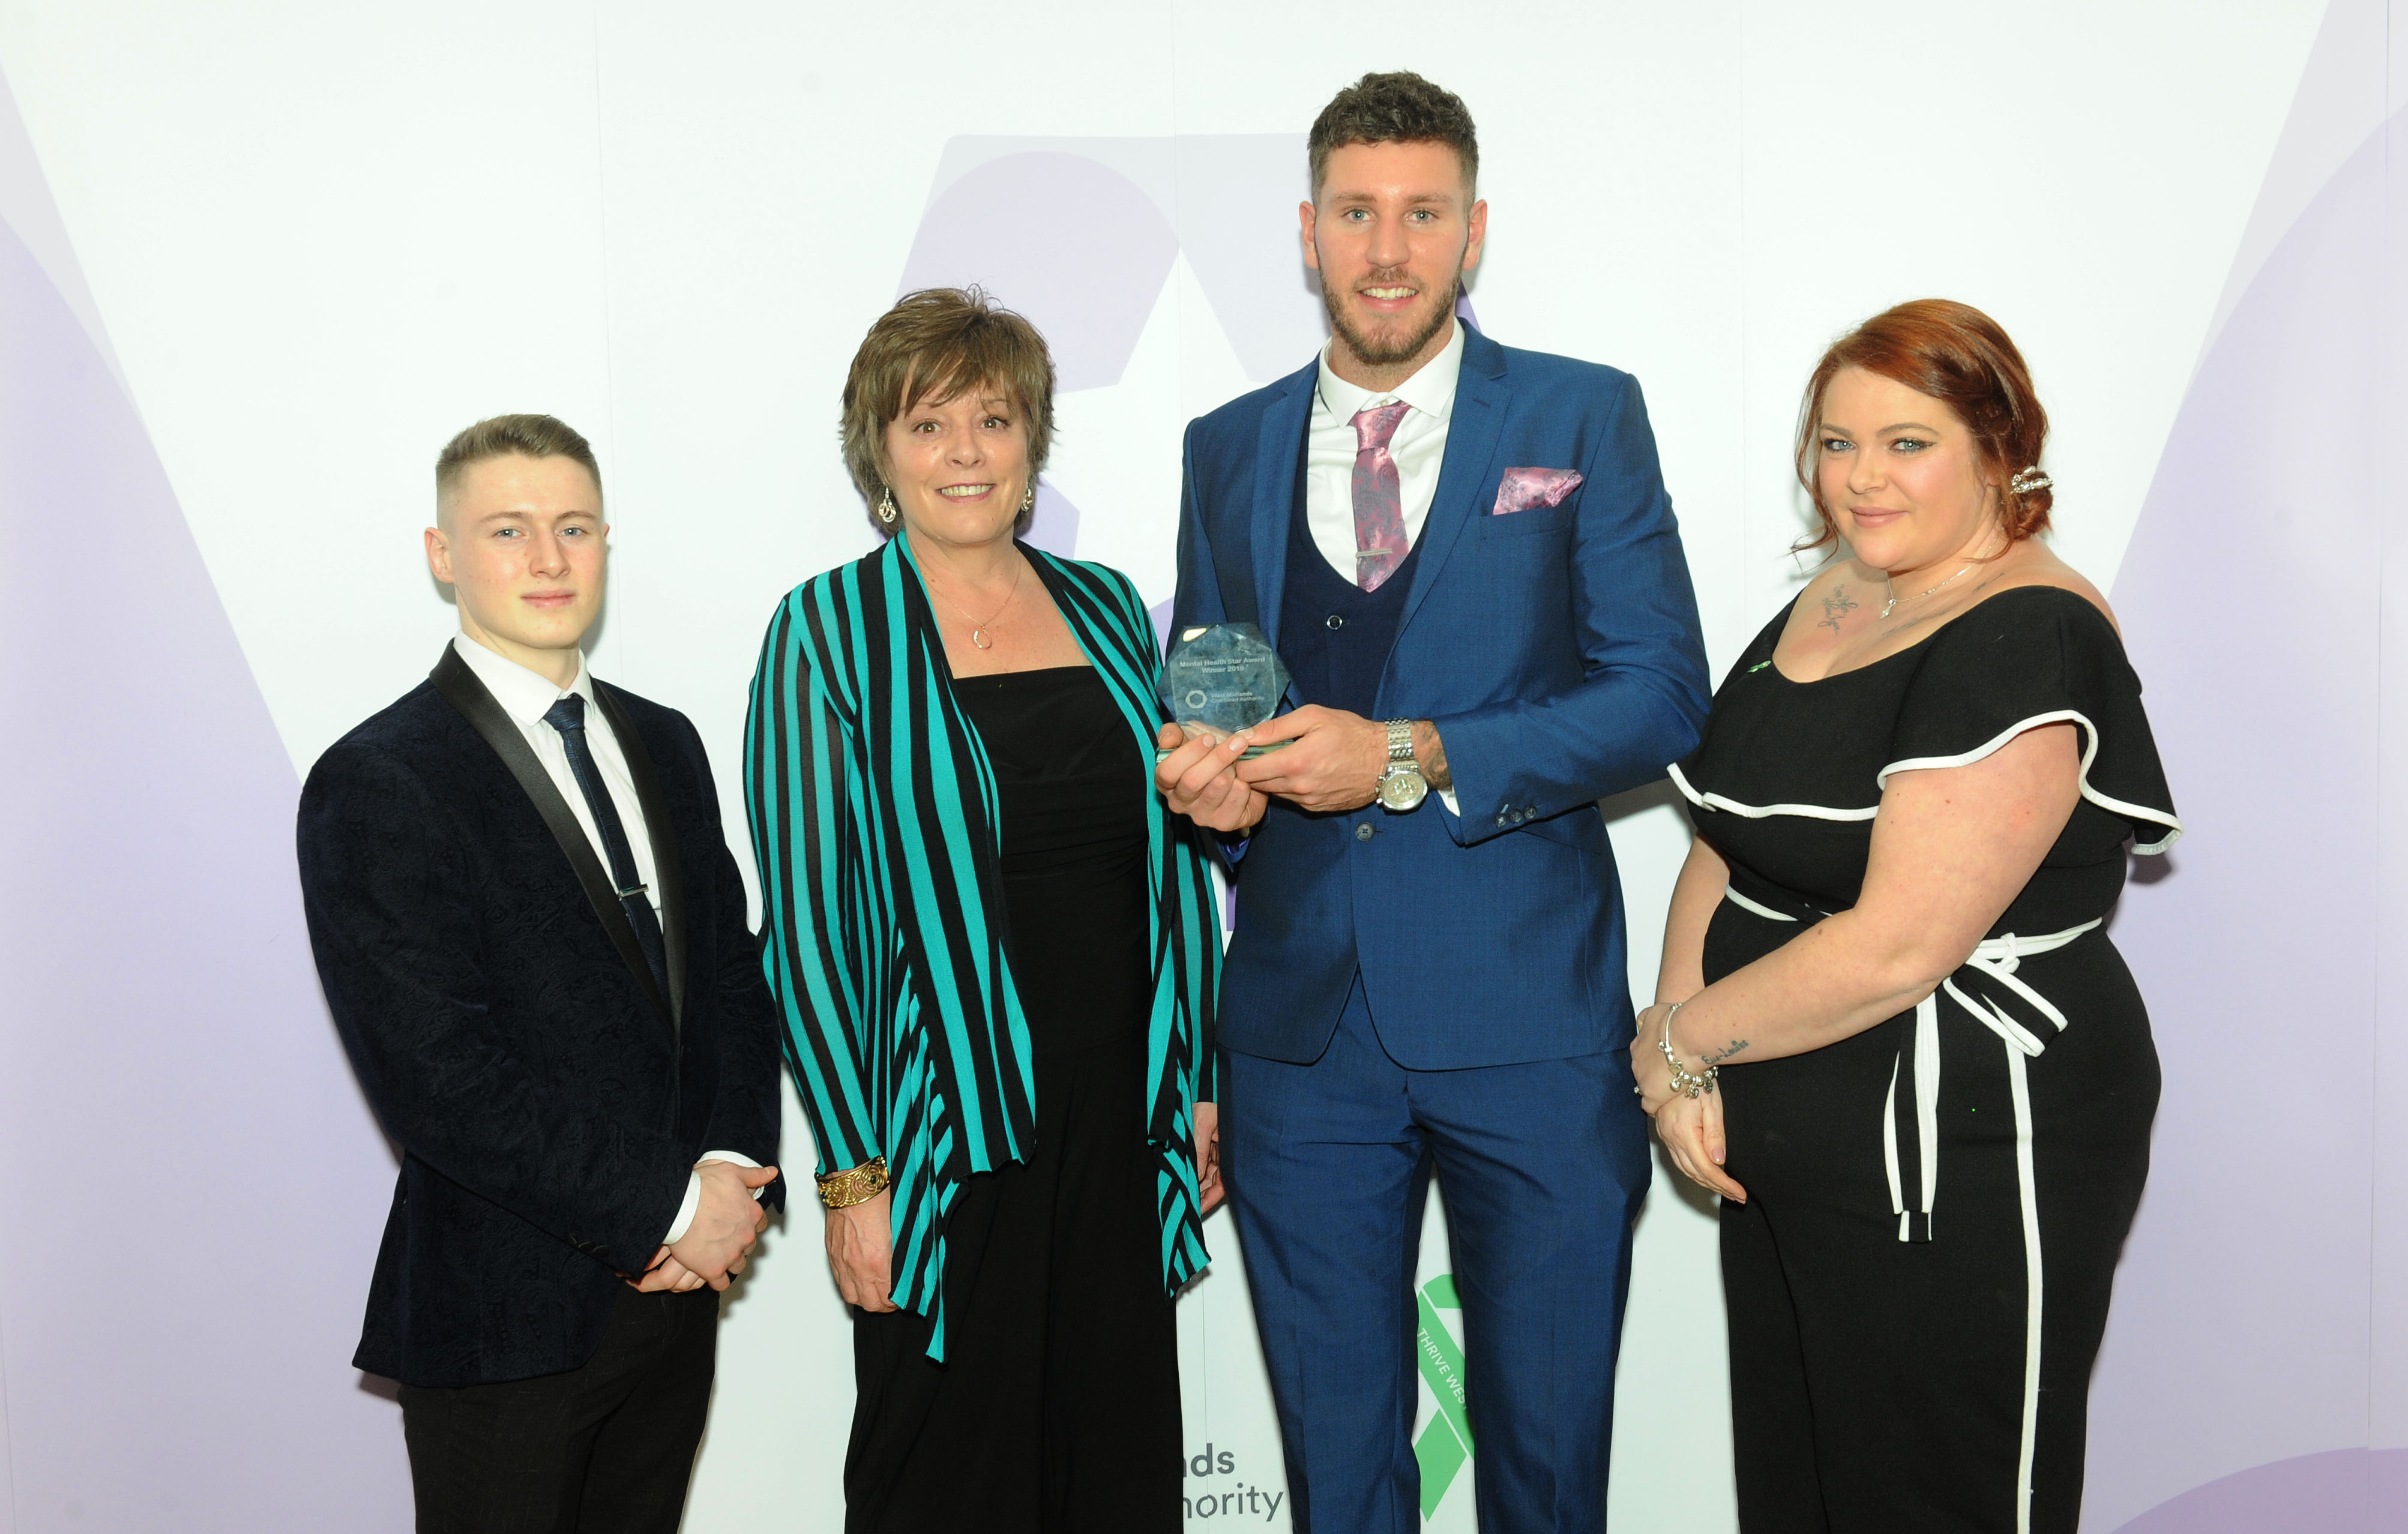 Joe Lockley and Bright Star Boxing Club colleagues celebrate winning a Thrive Mental Health Award.